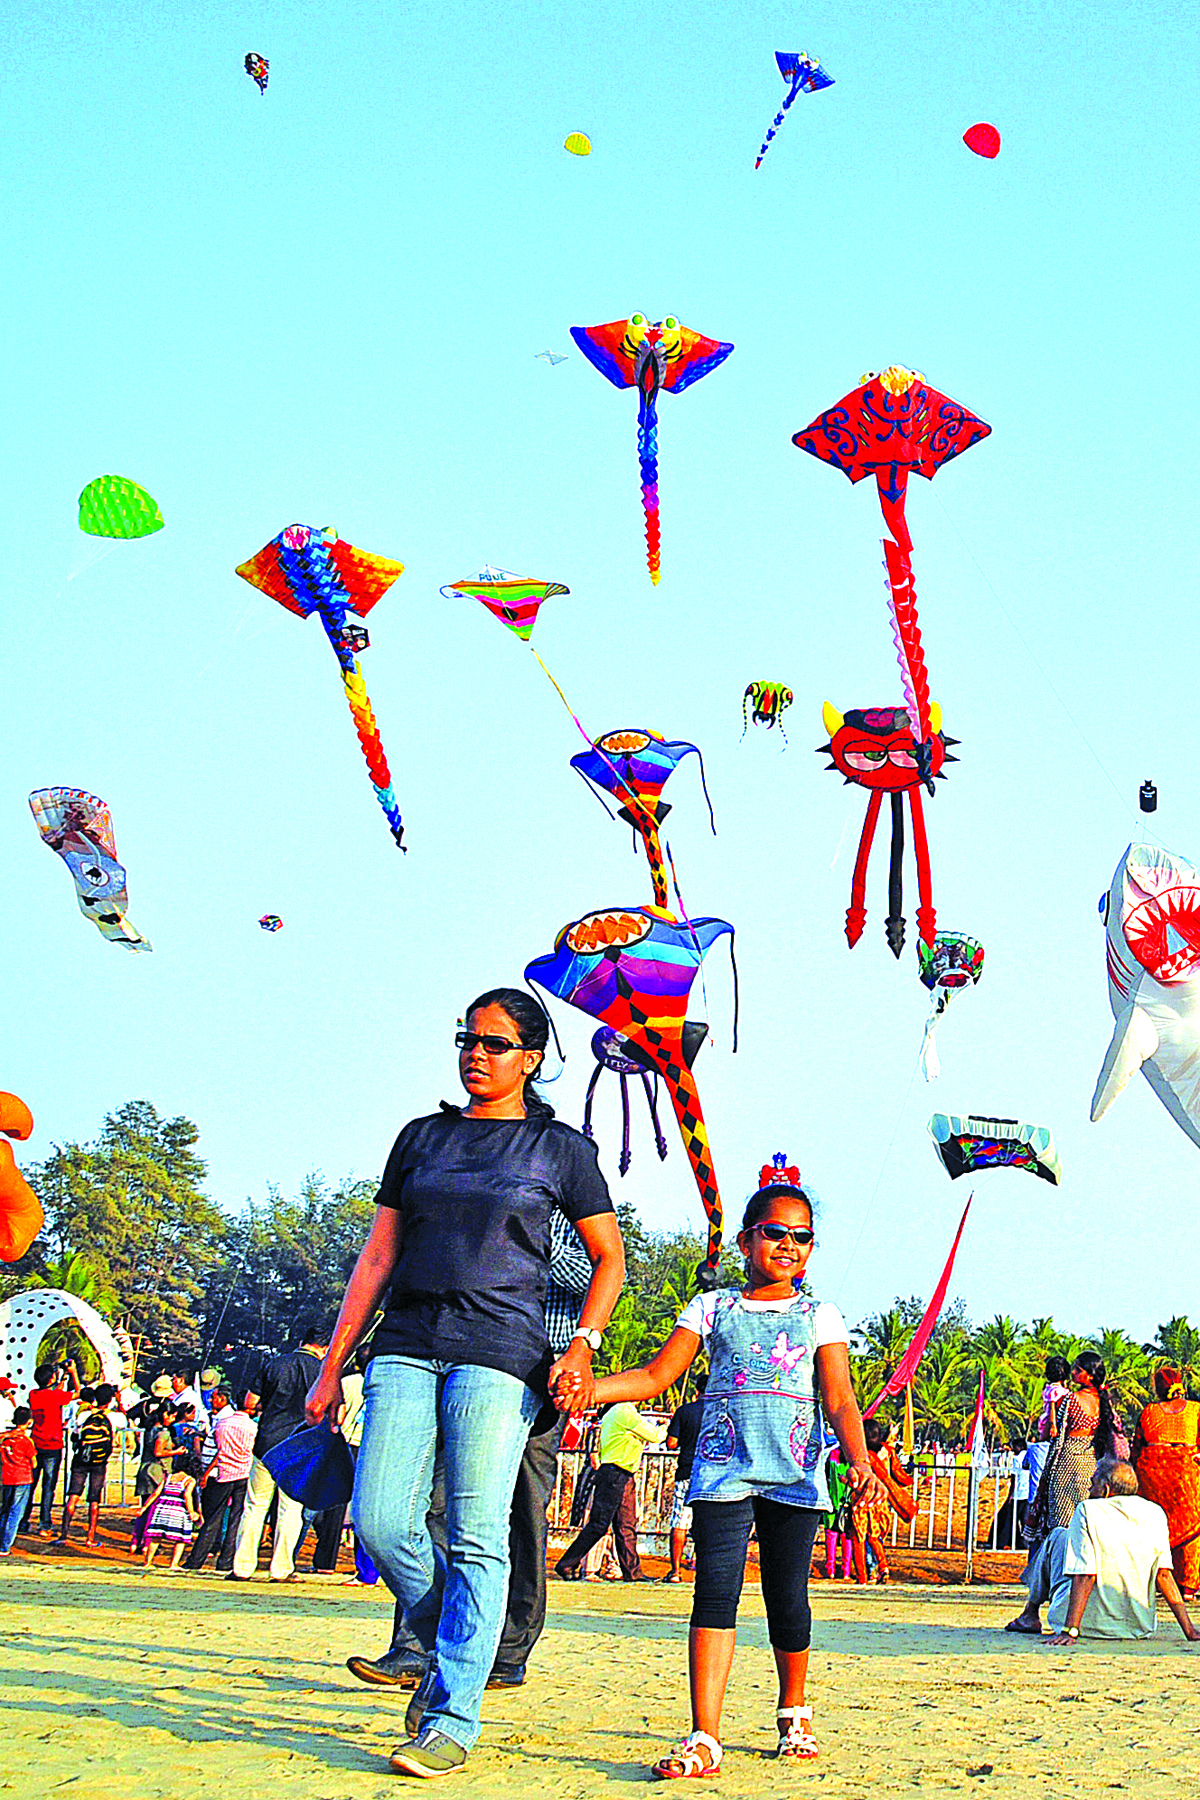 Sky high: A family walks amidst a variety of shapes and sizes of kites at the International Super Kite Festival 2015 at Miramar beach on Saturday.  Photo by: Vincent Braganza